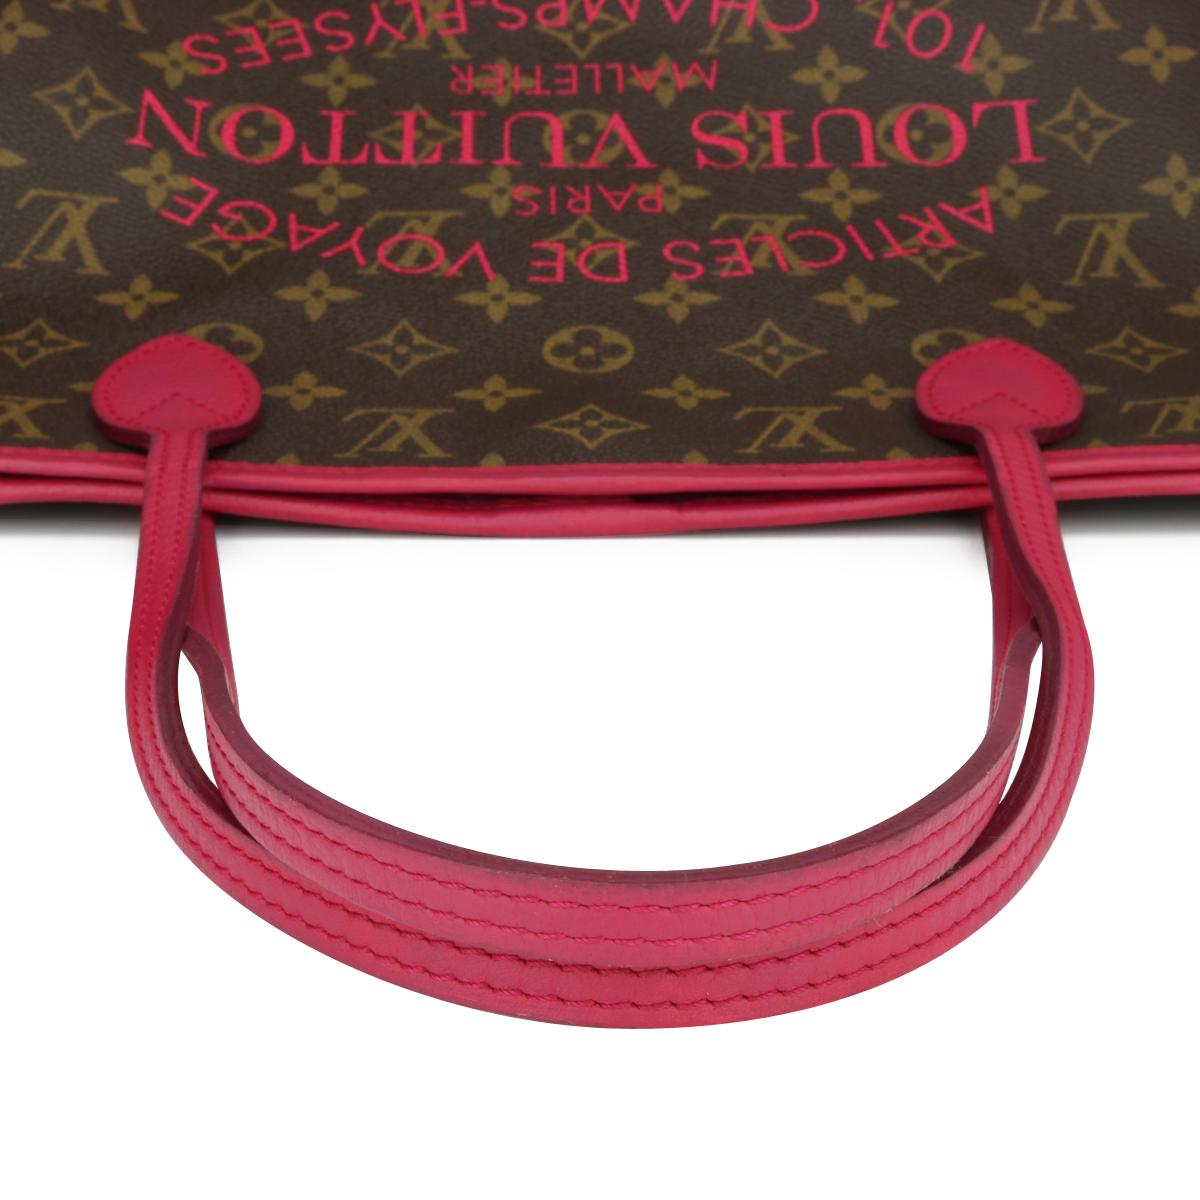 Louis Vuitton Neverfull MM Ikat Bag in Monogram Fuchsia 2013 Limited Edition For Sale 9